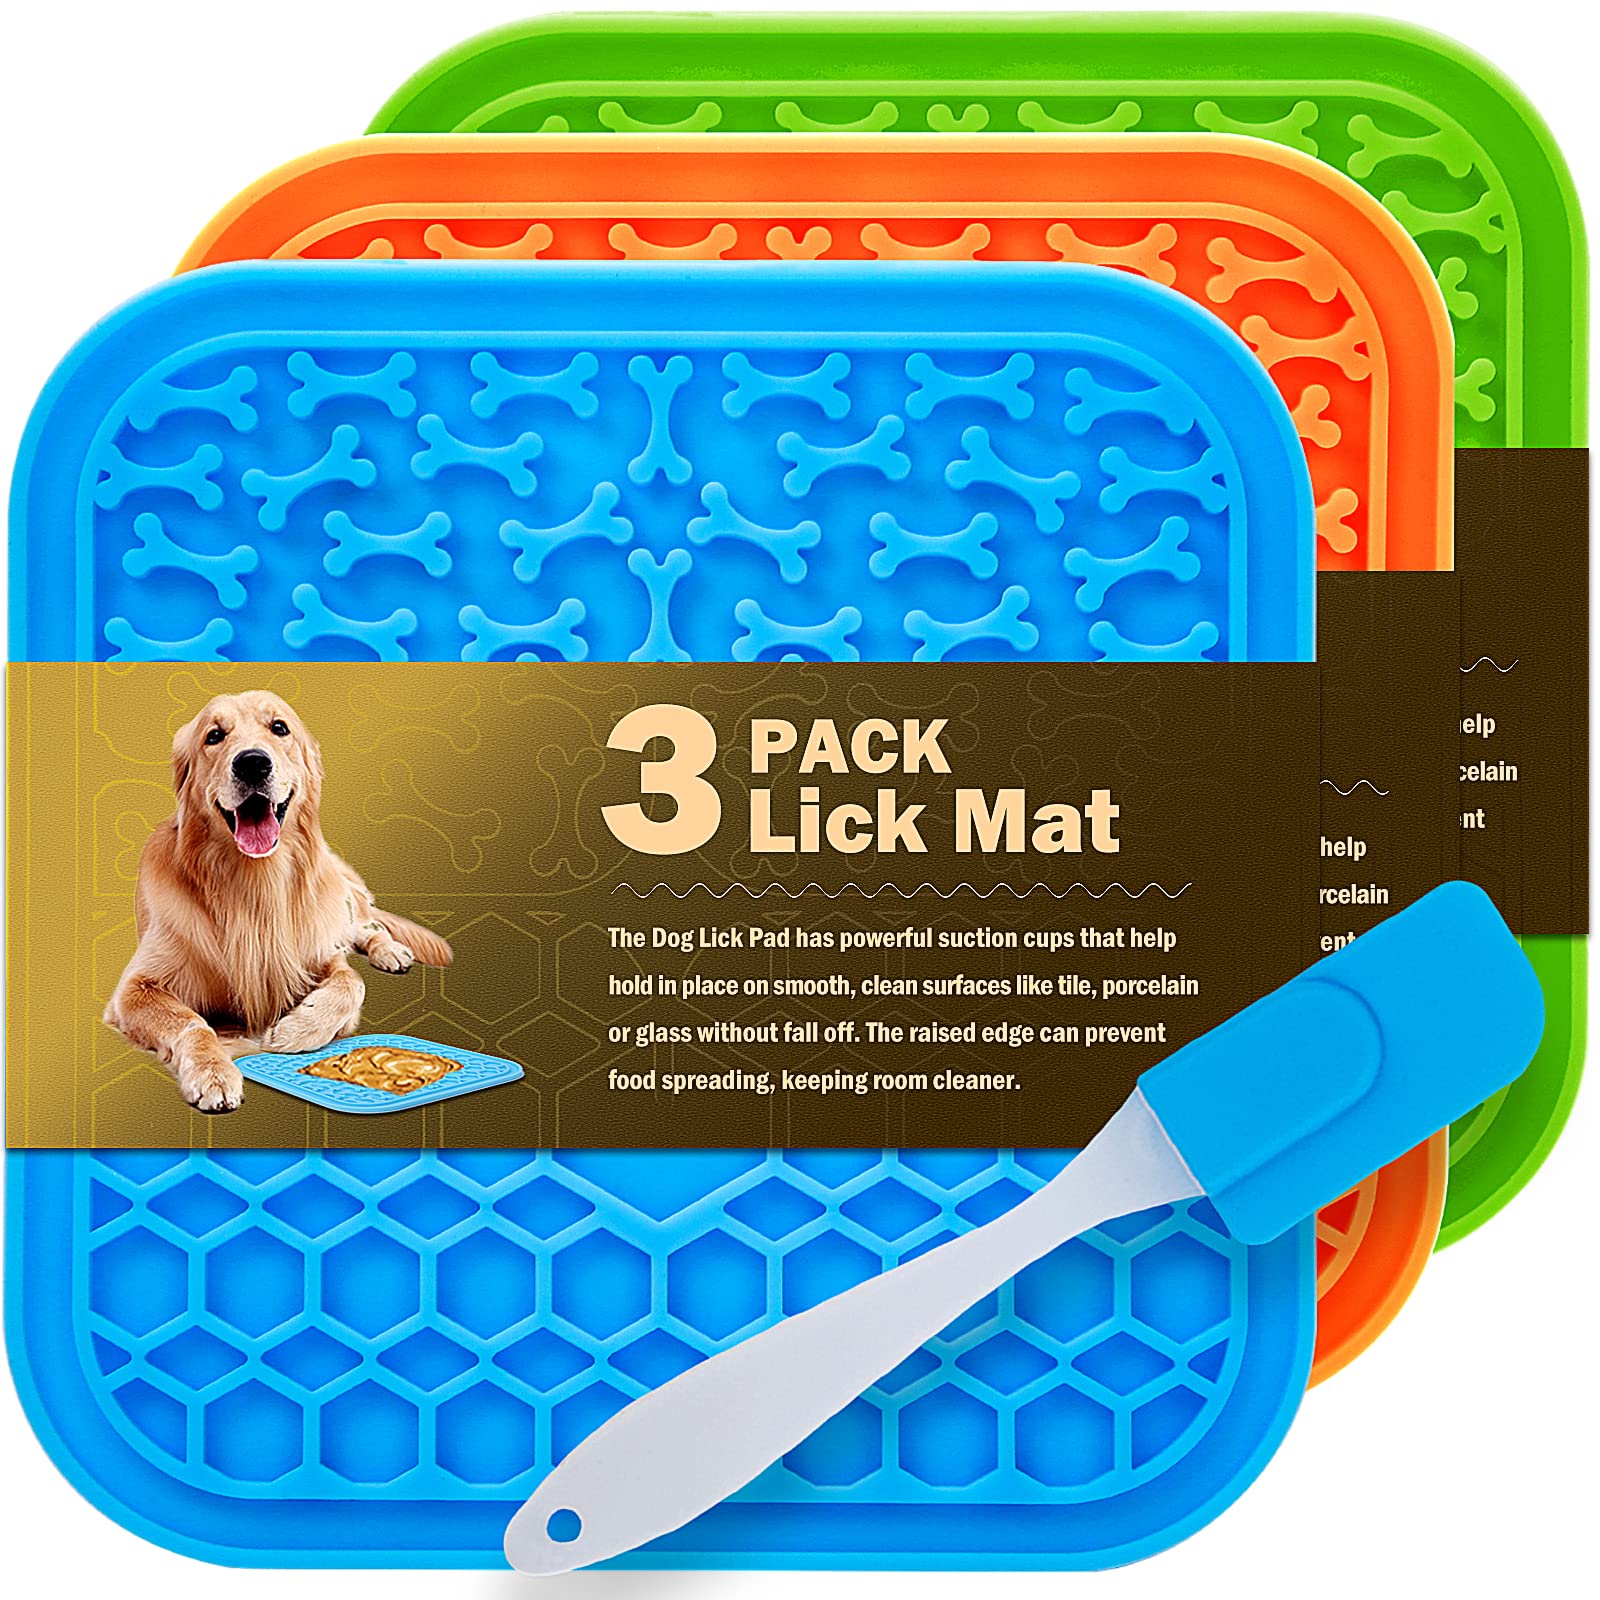 Our K9 Lick Mat for Dogs – Slow Feeding, Good Oral Hygiene